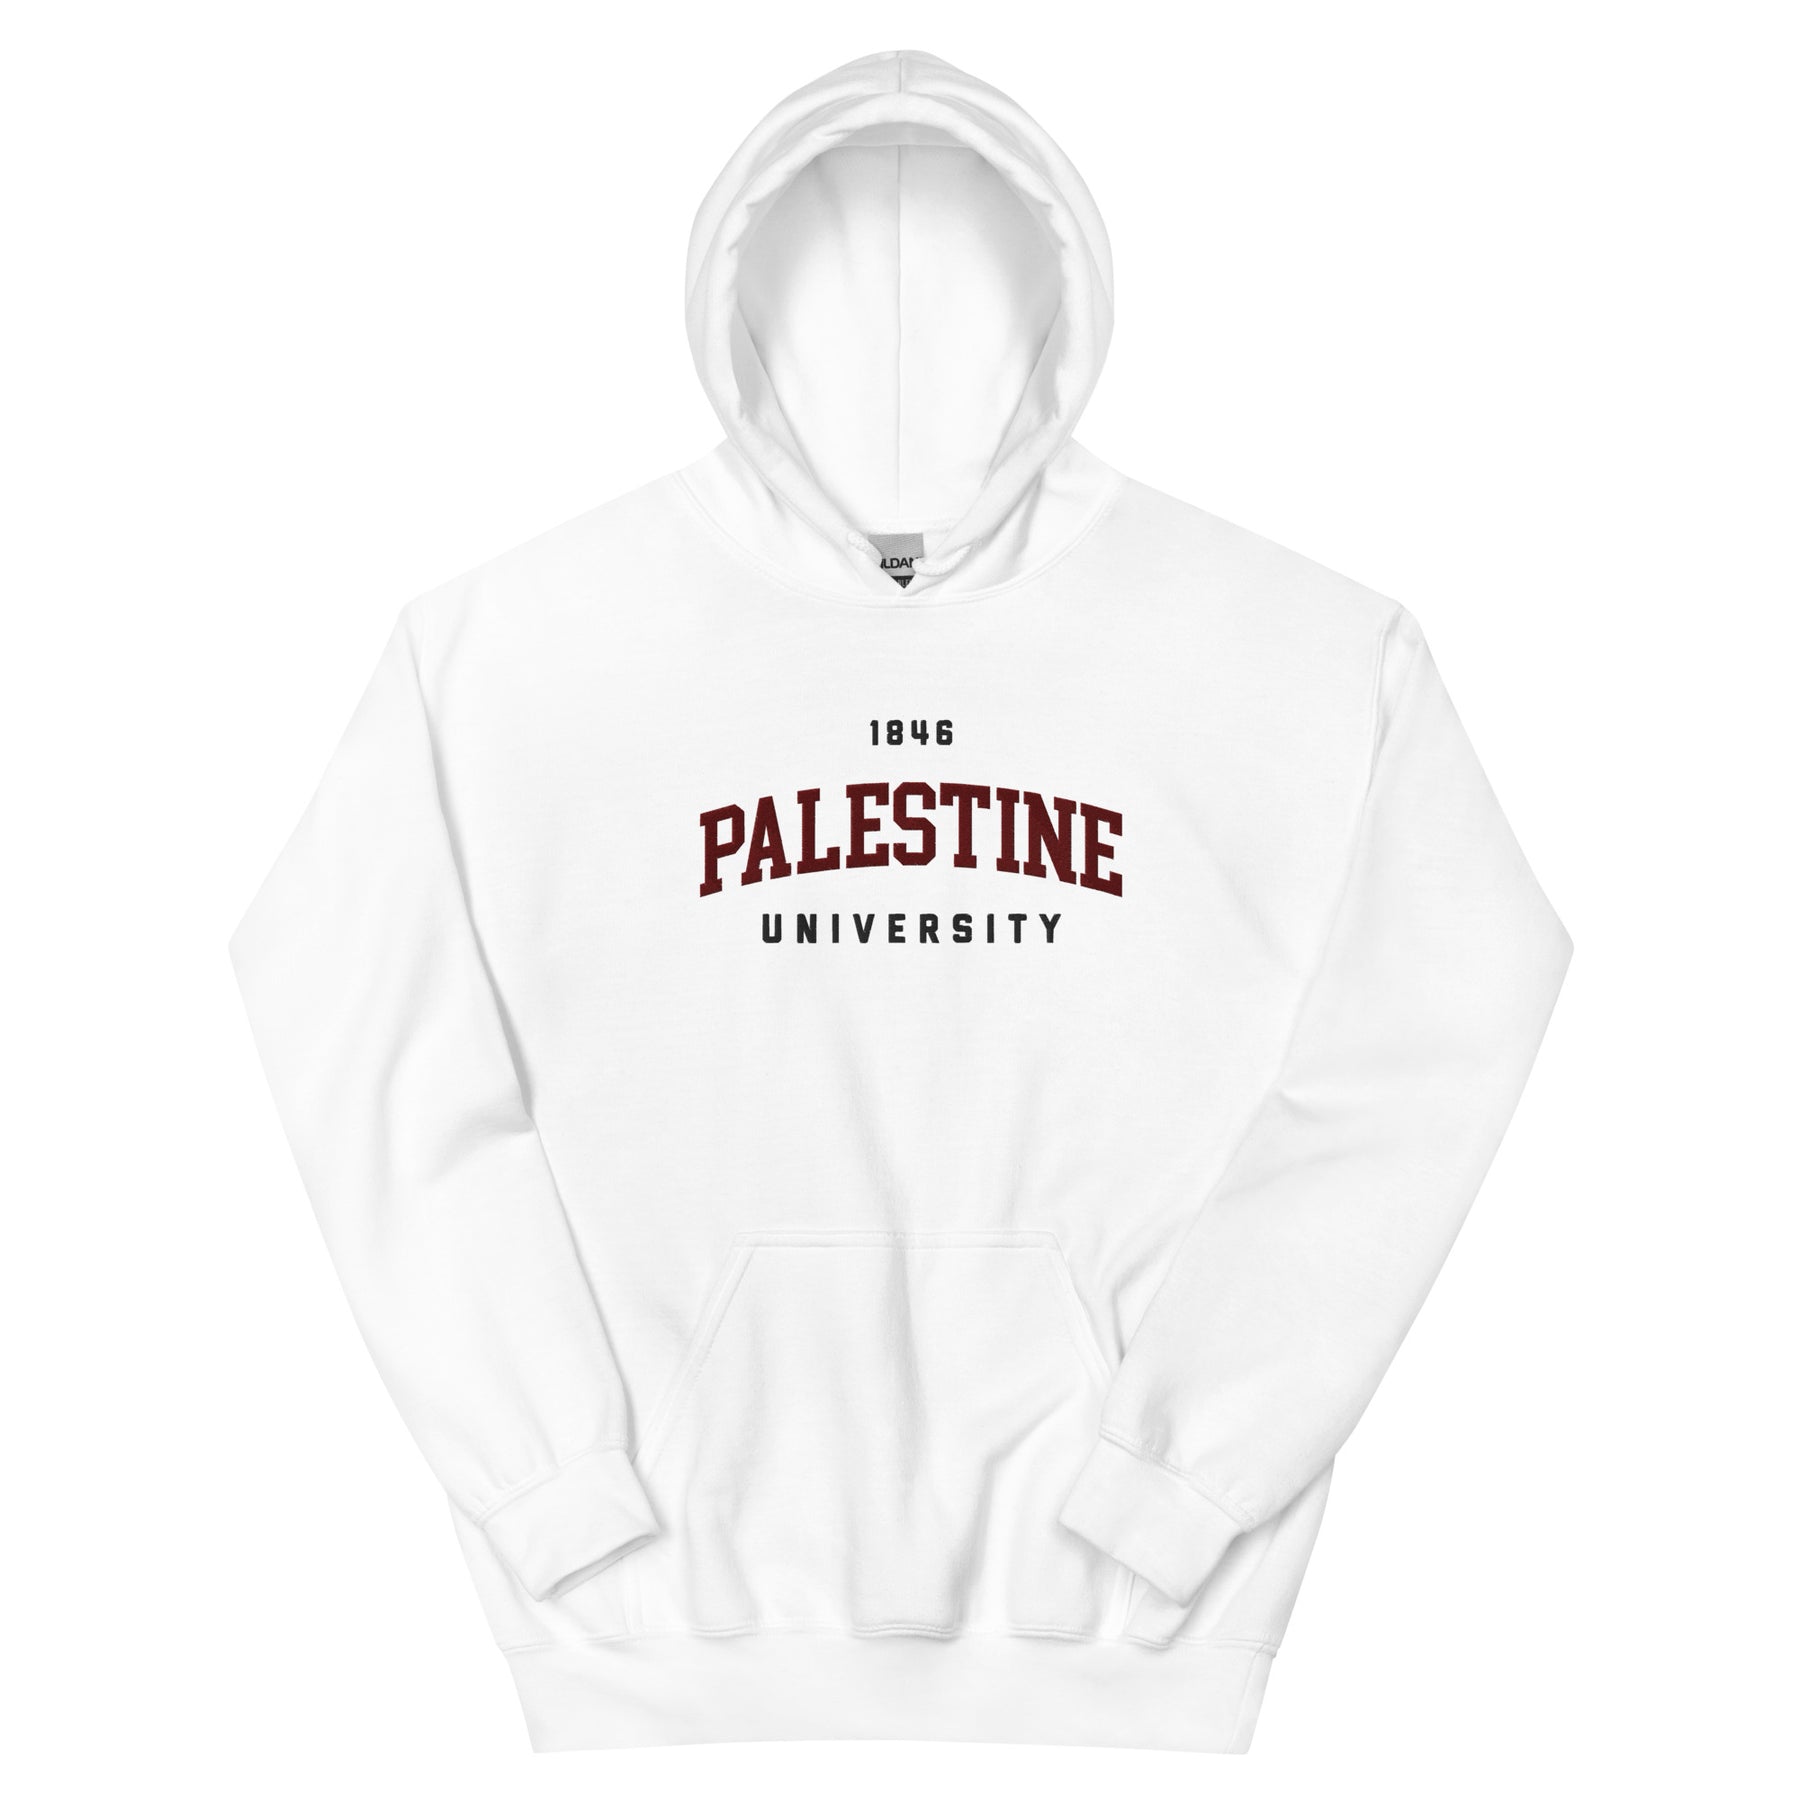 Palestine University 1846 hoodie in white by Dar Collective